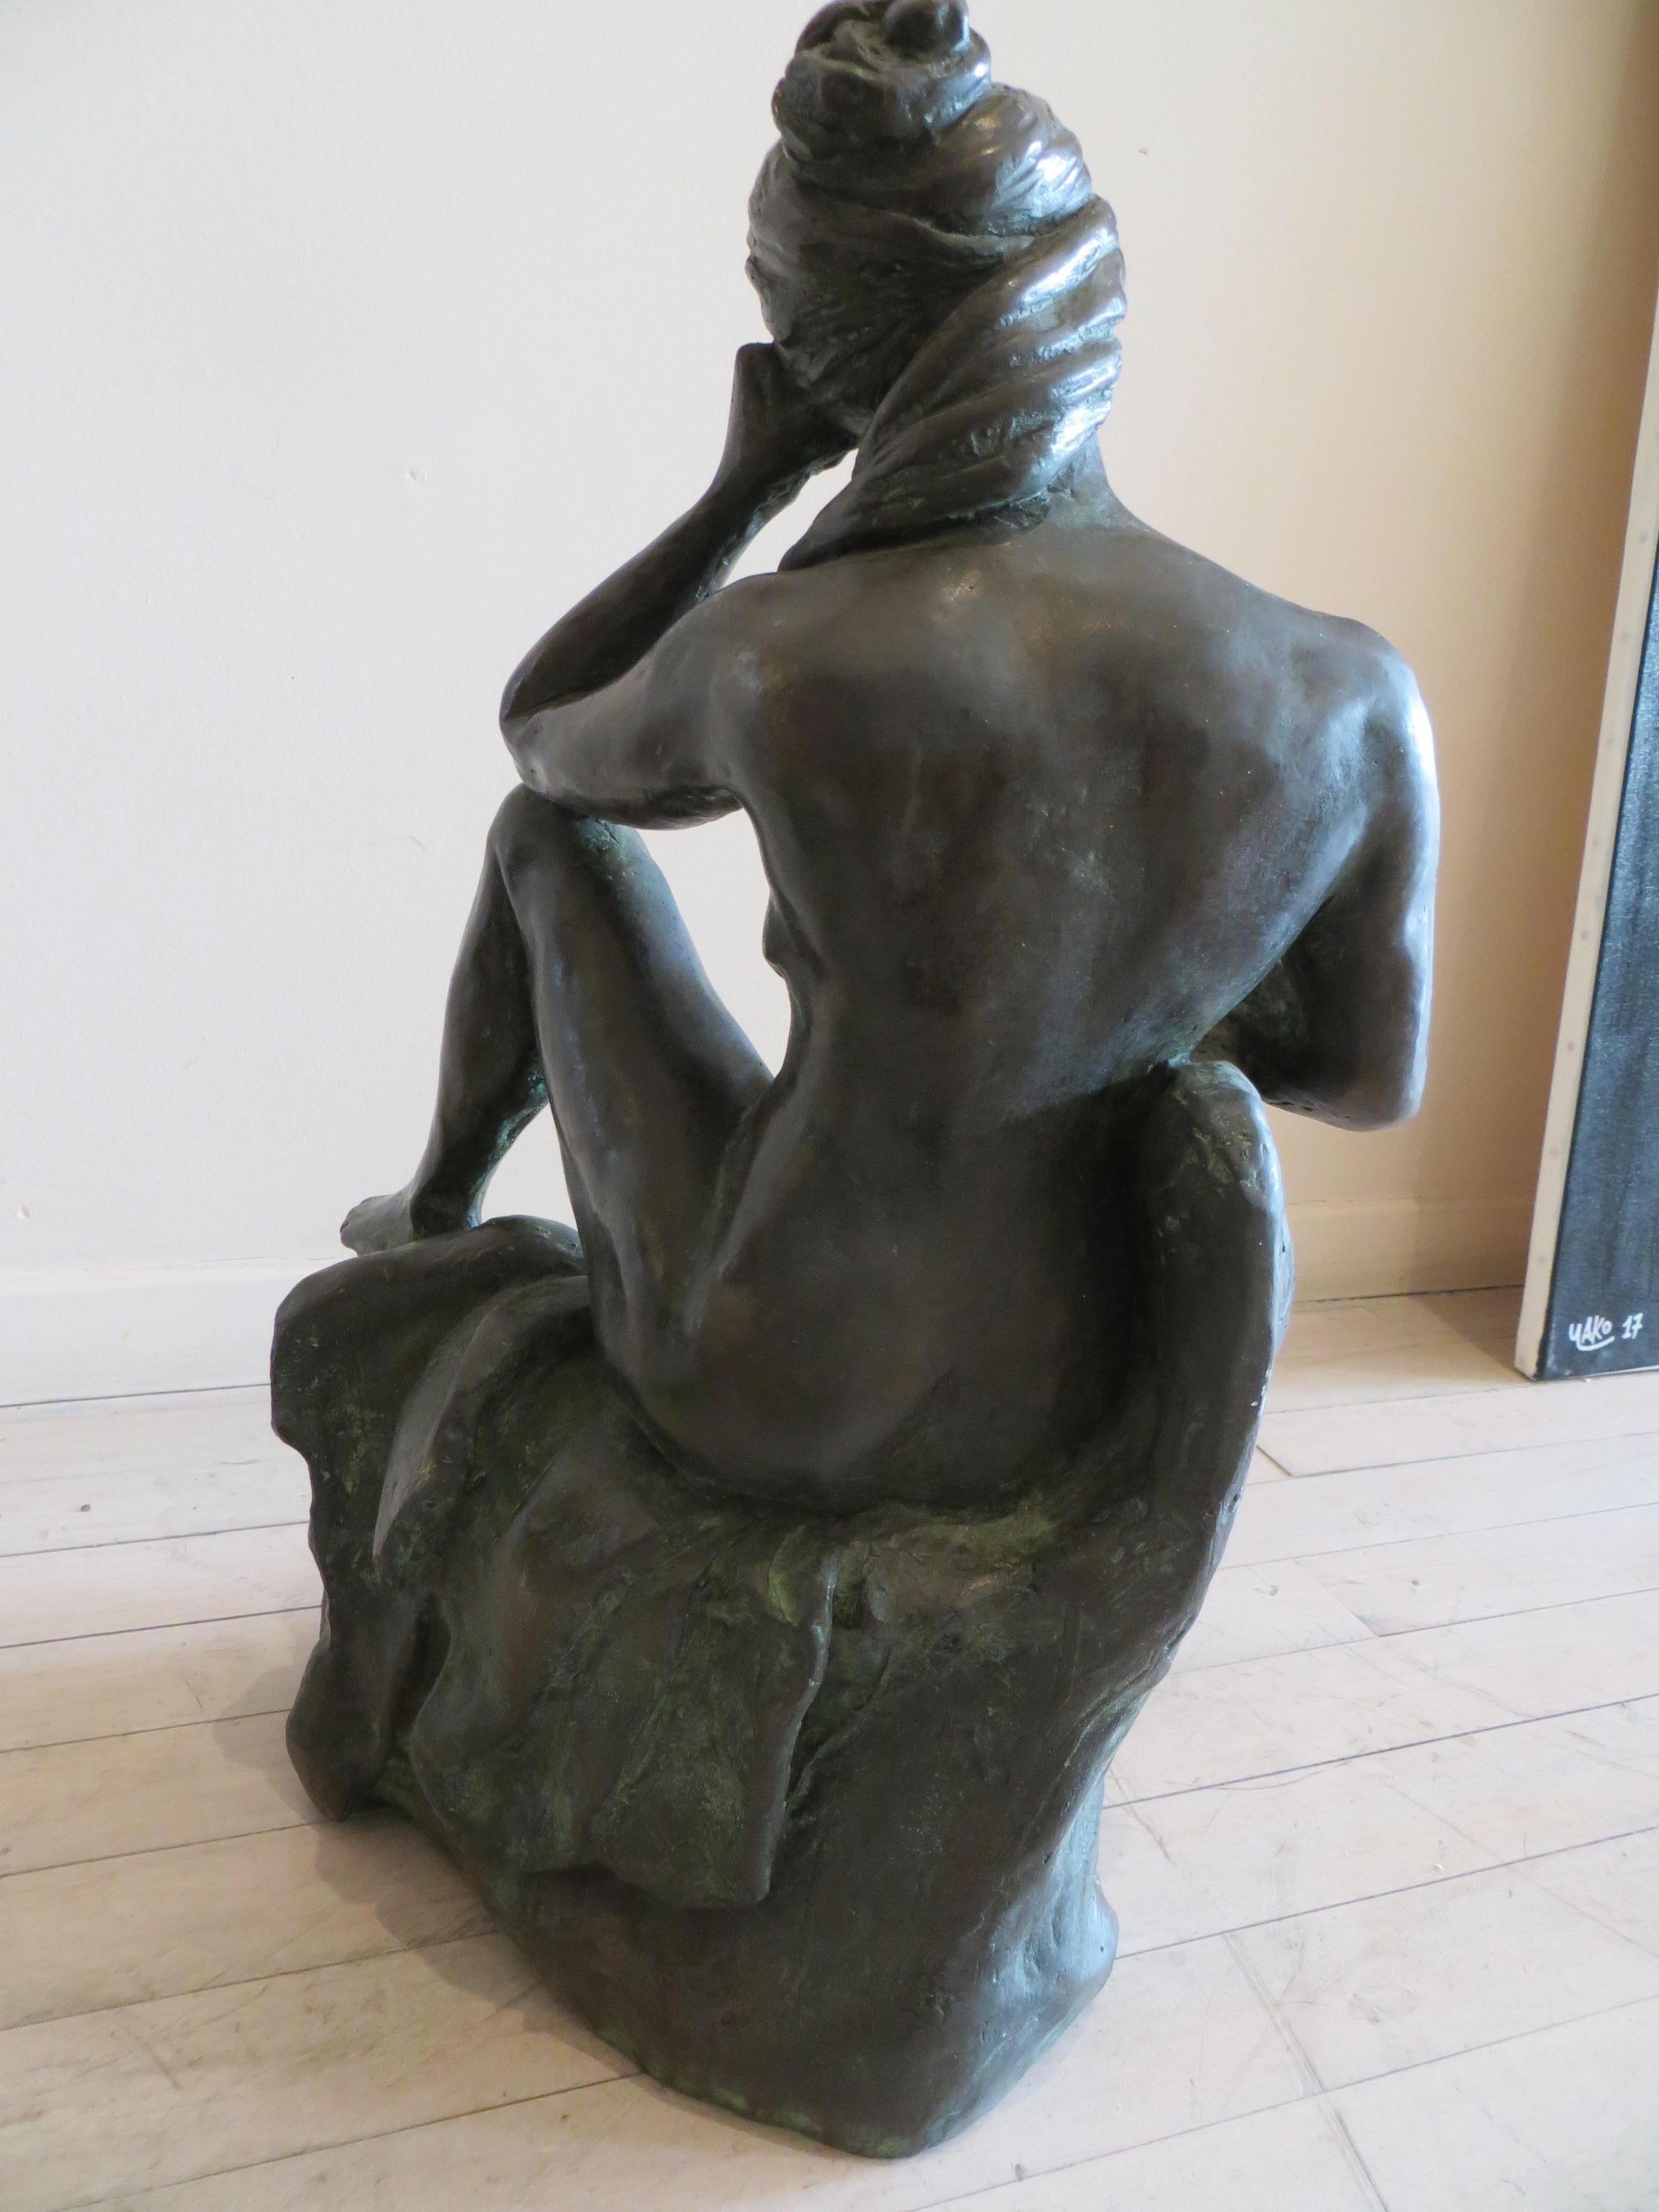 Seated Nude Woman - Gold Nude Sculpture by Dora Navon